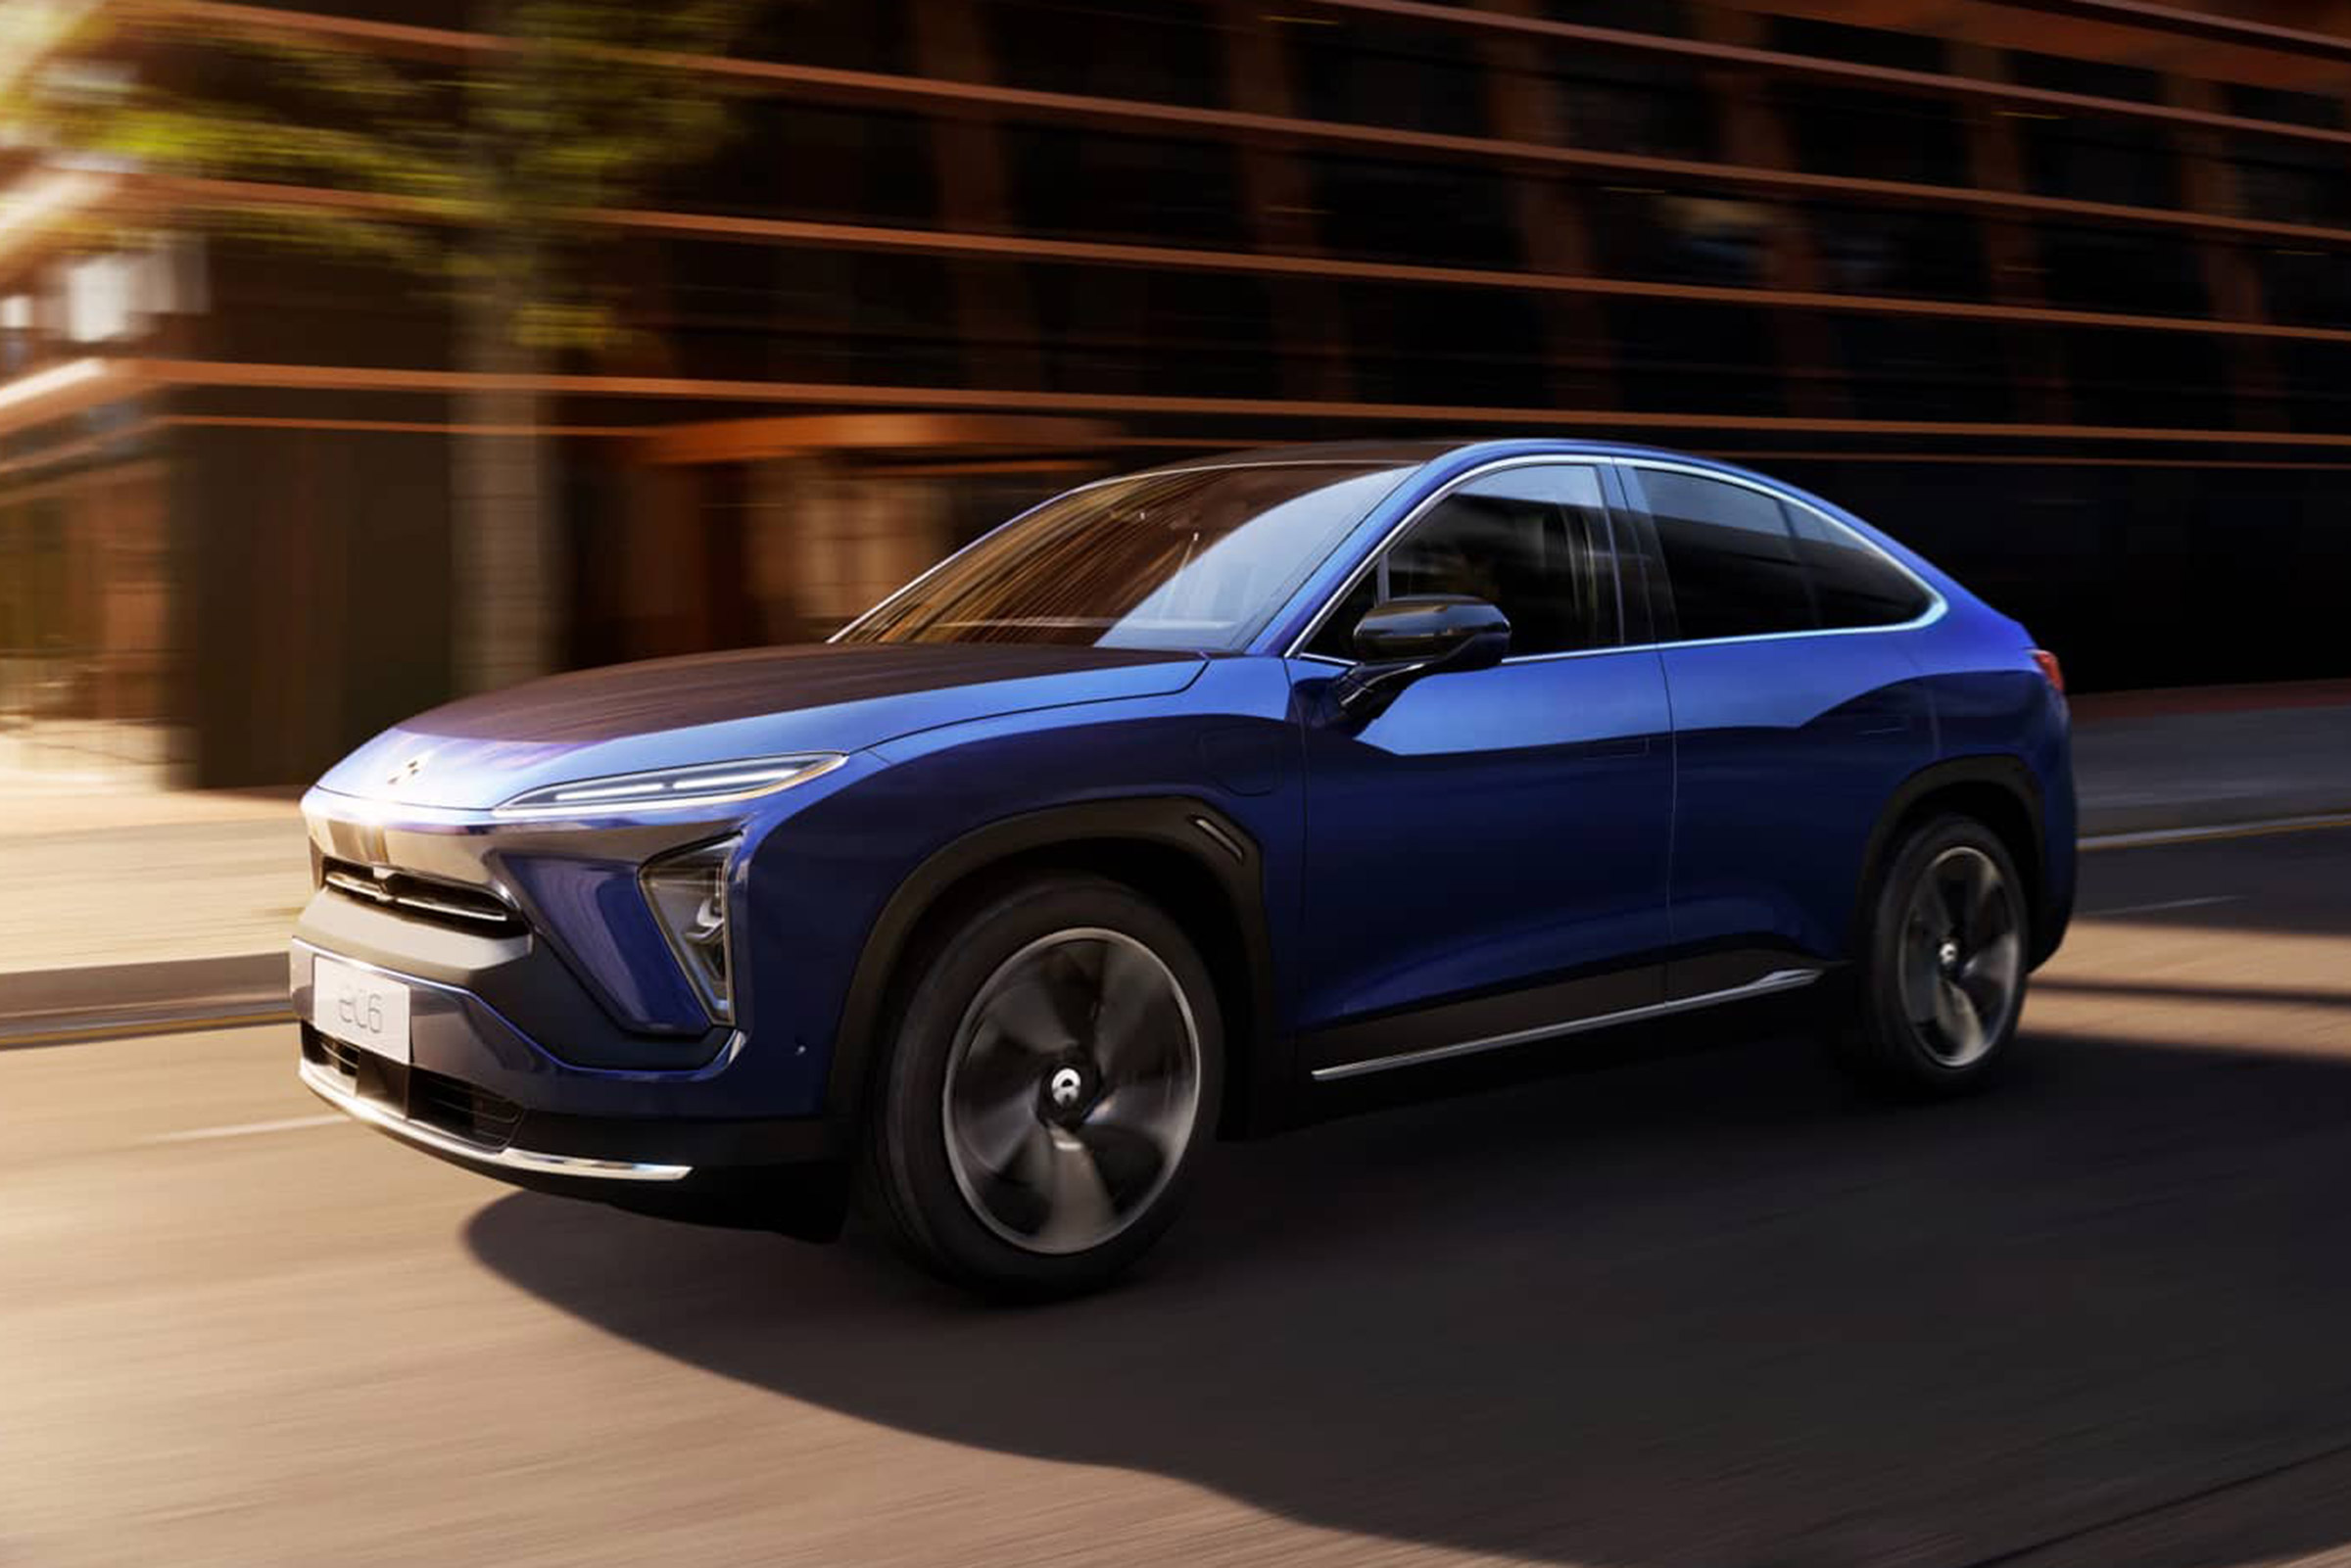 New NIO EC6 electric SUV launched with up to 382 miles of 